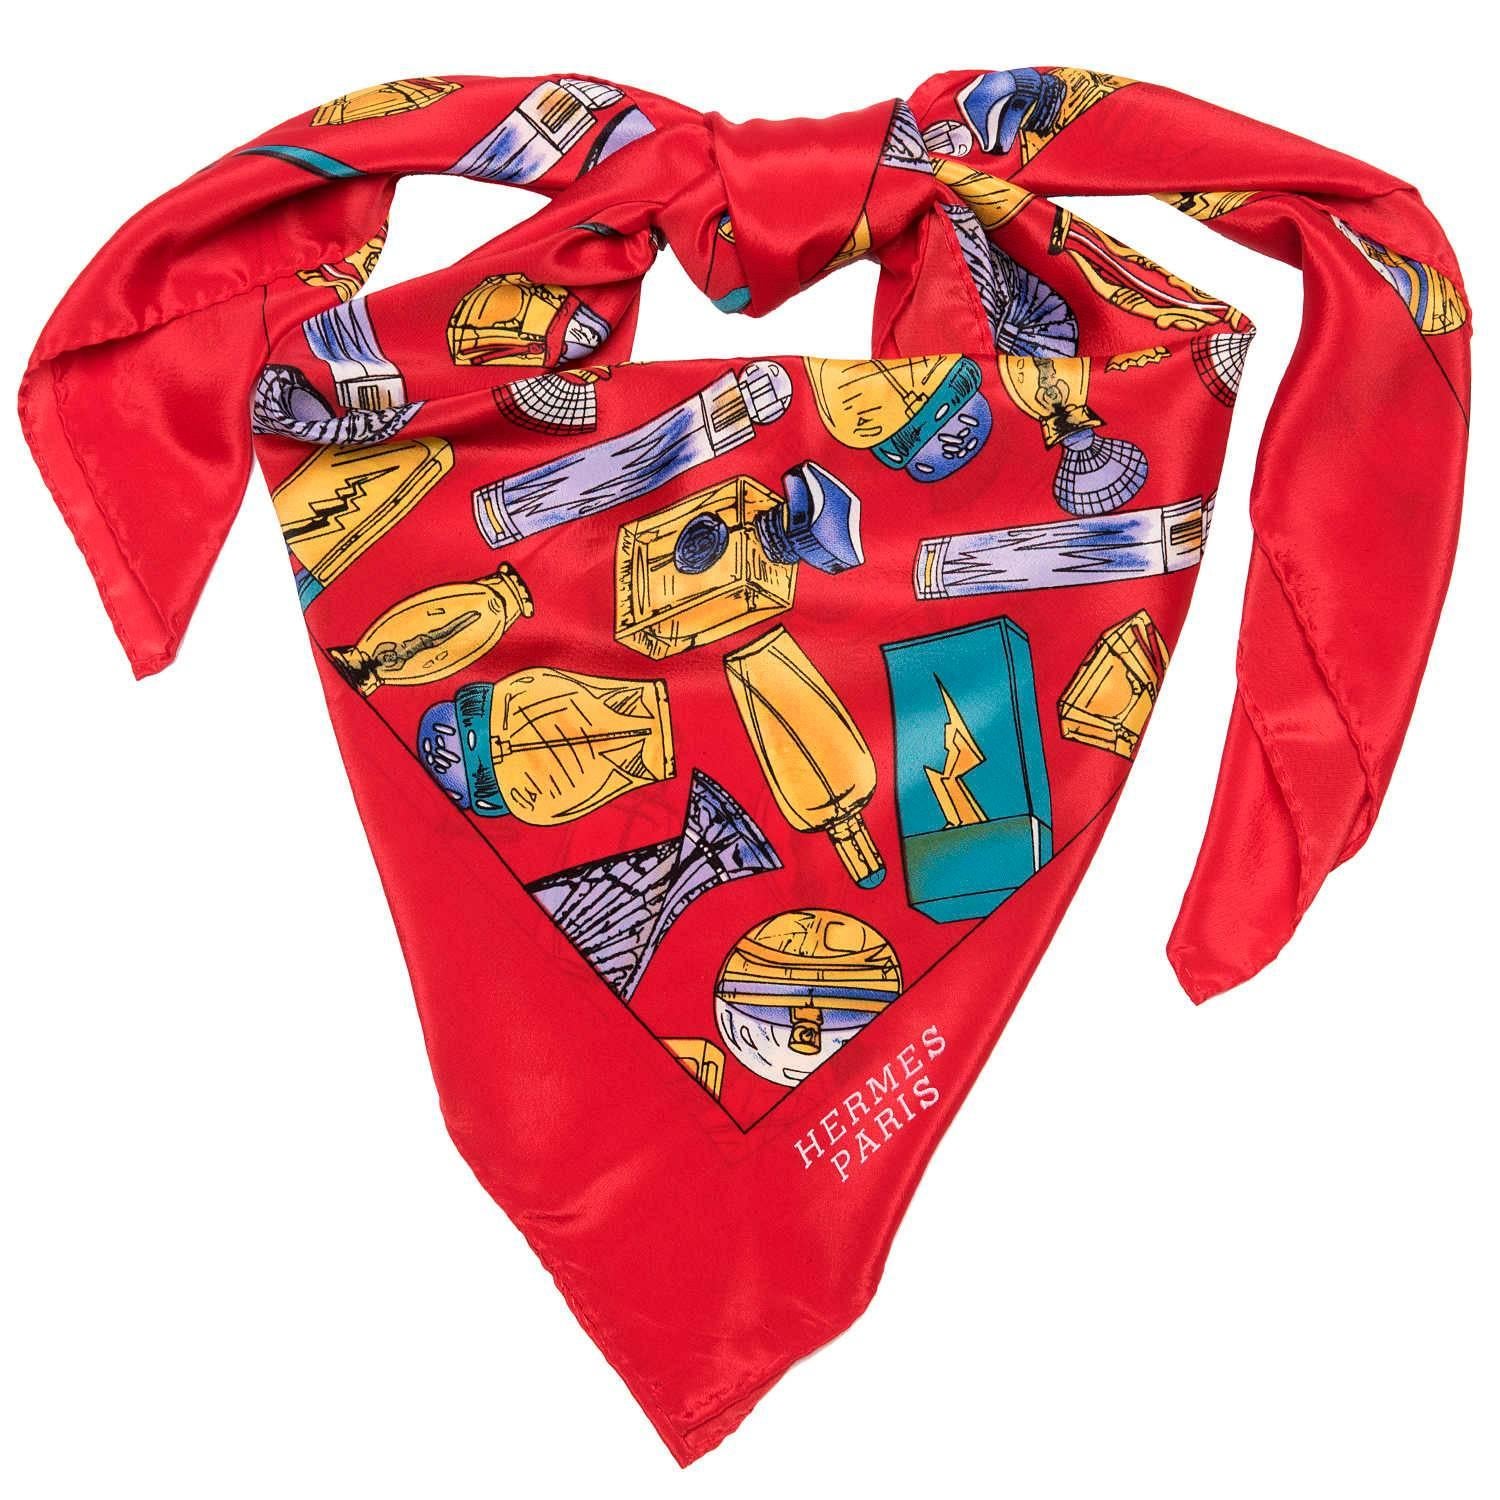 A superb Hermes Silk Scarf, multi-coloured with a red border, decorated with perfume bottles of all different shapes & sizes to create this delightful scarf. In excellent condition, with no tears, holes, marks or odours.